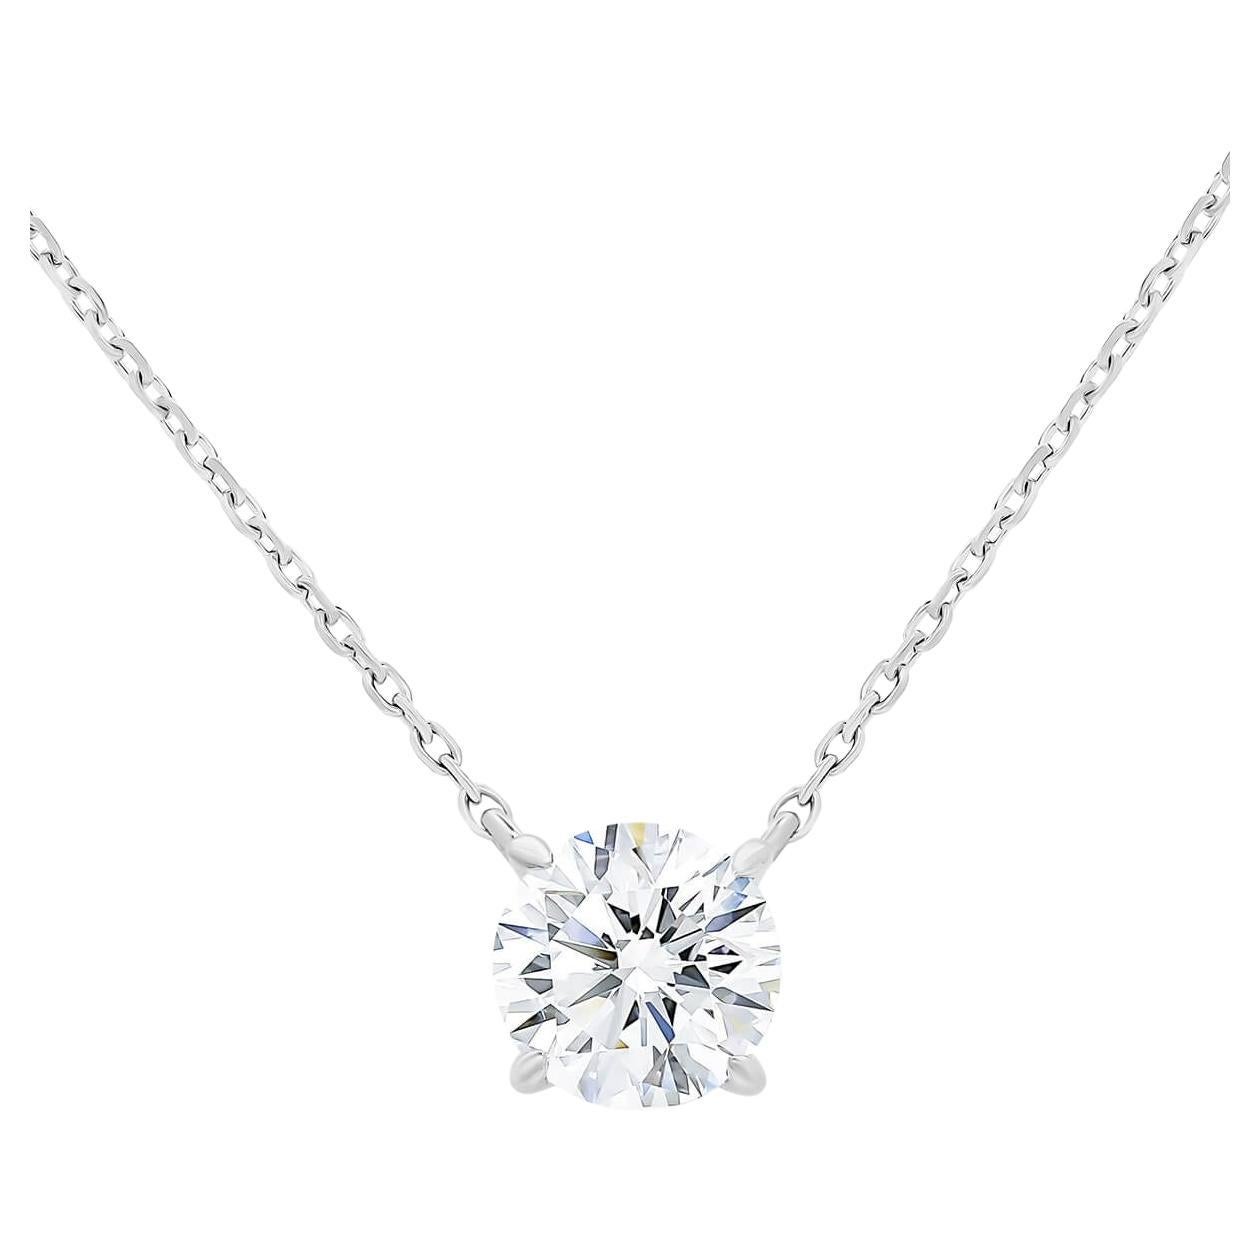 Beauvince GIA HVVS1 Certified 1.00 Ct Round Solitaire Diamond Pendant